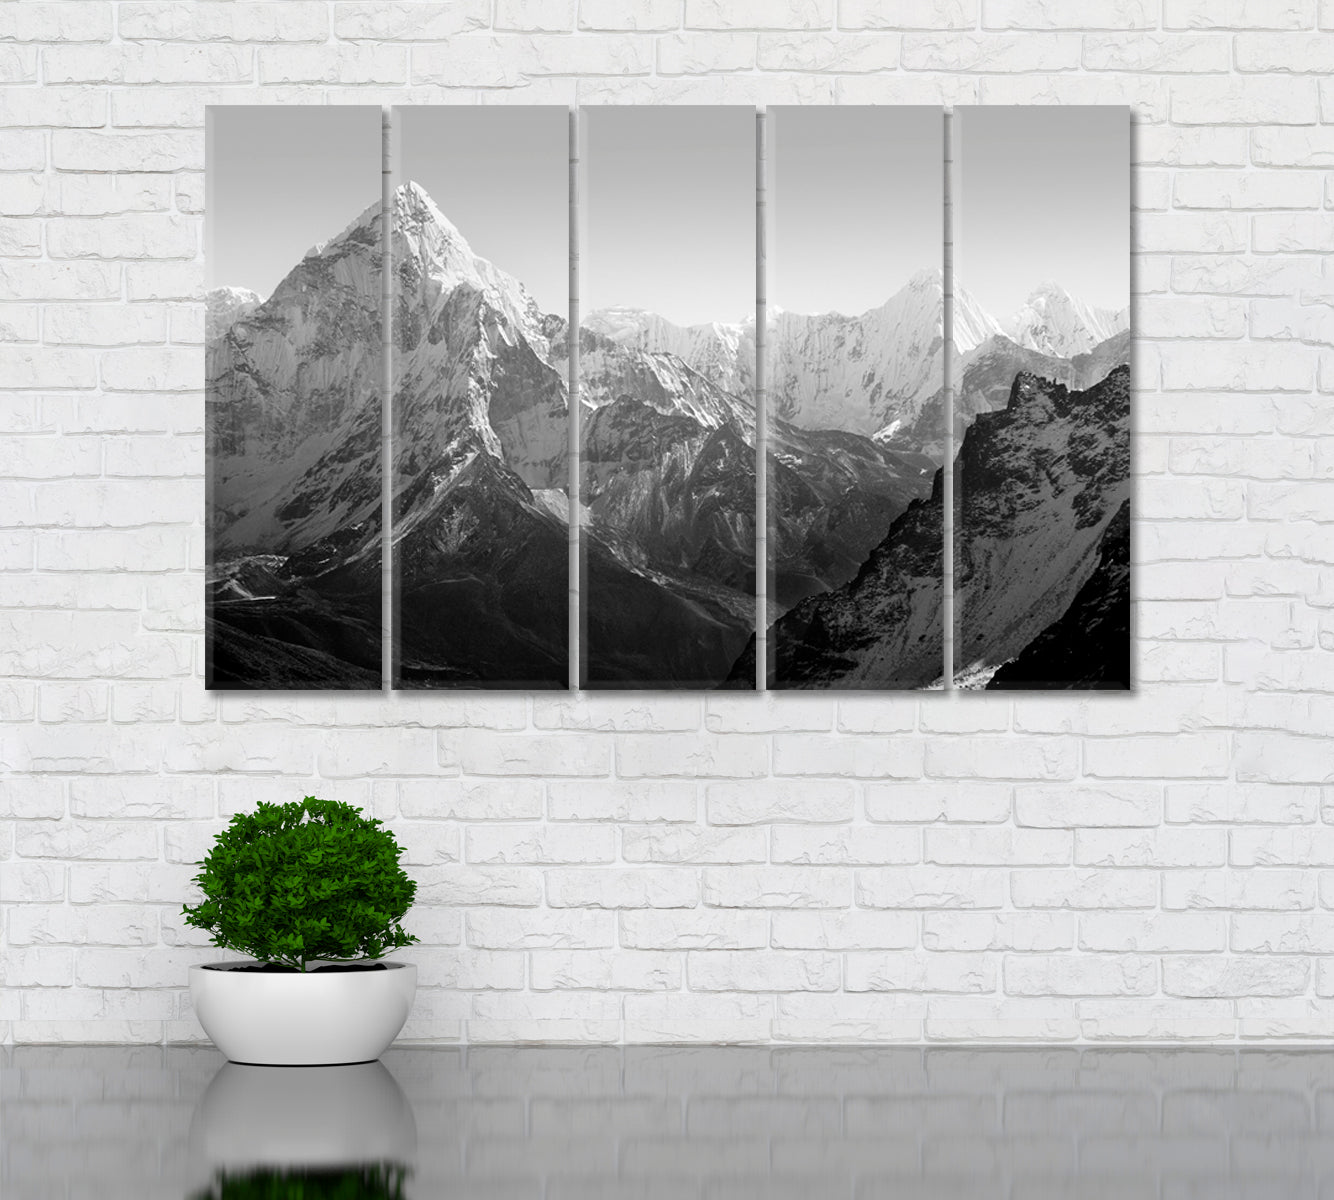 Mount Everest Nepal Canvas Print ArtLexy 5 Panels 36"x24" inches 